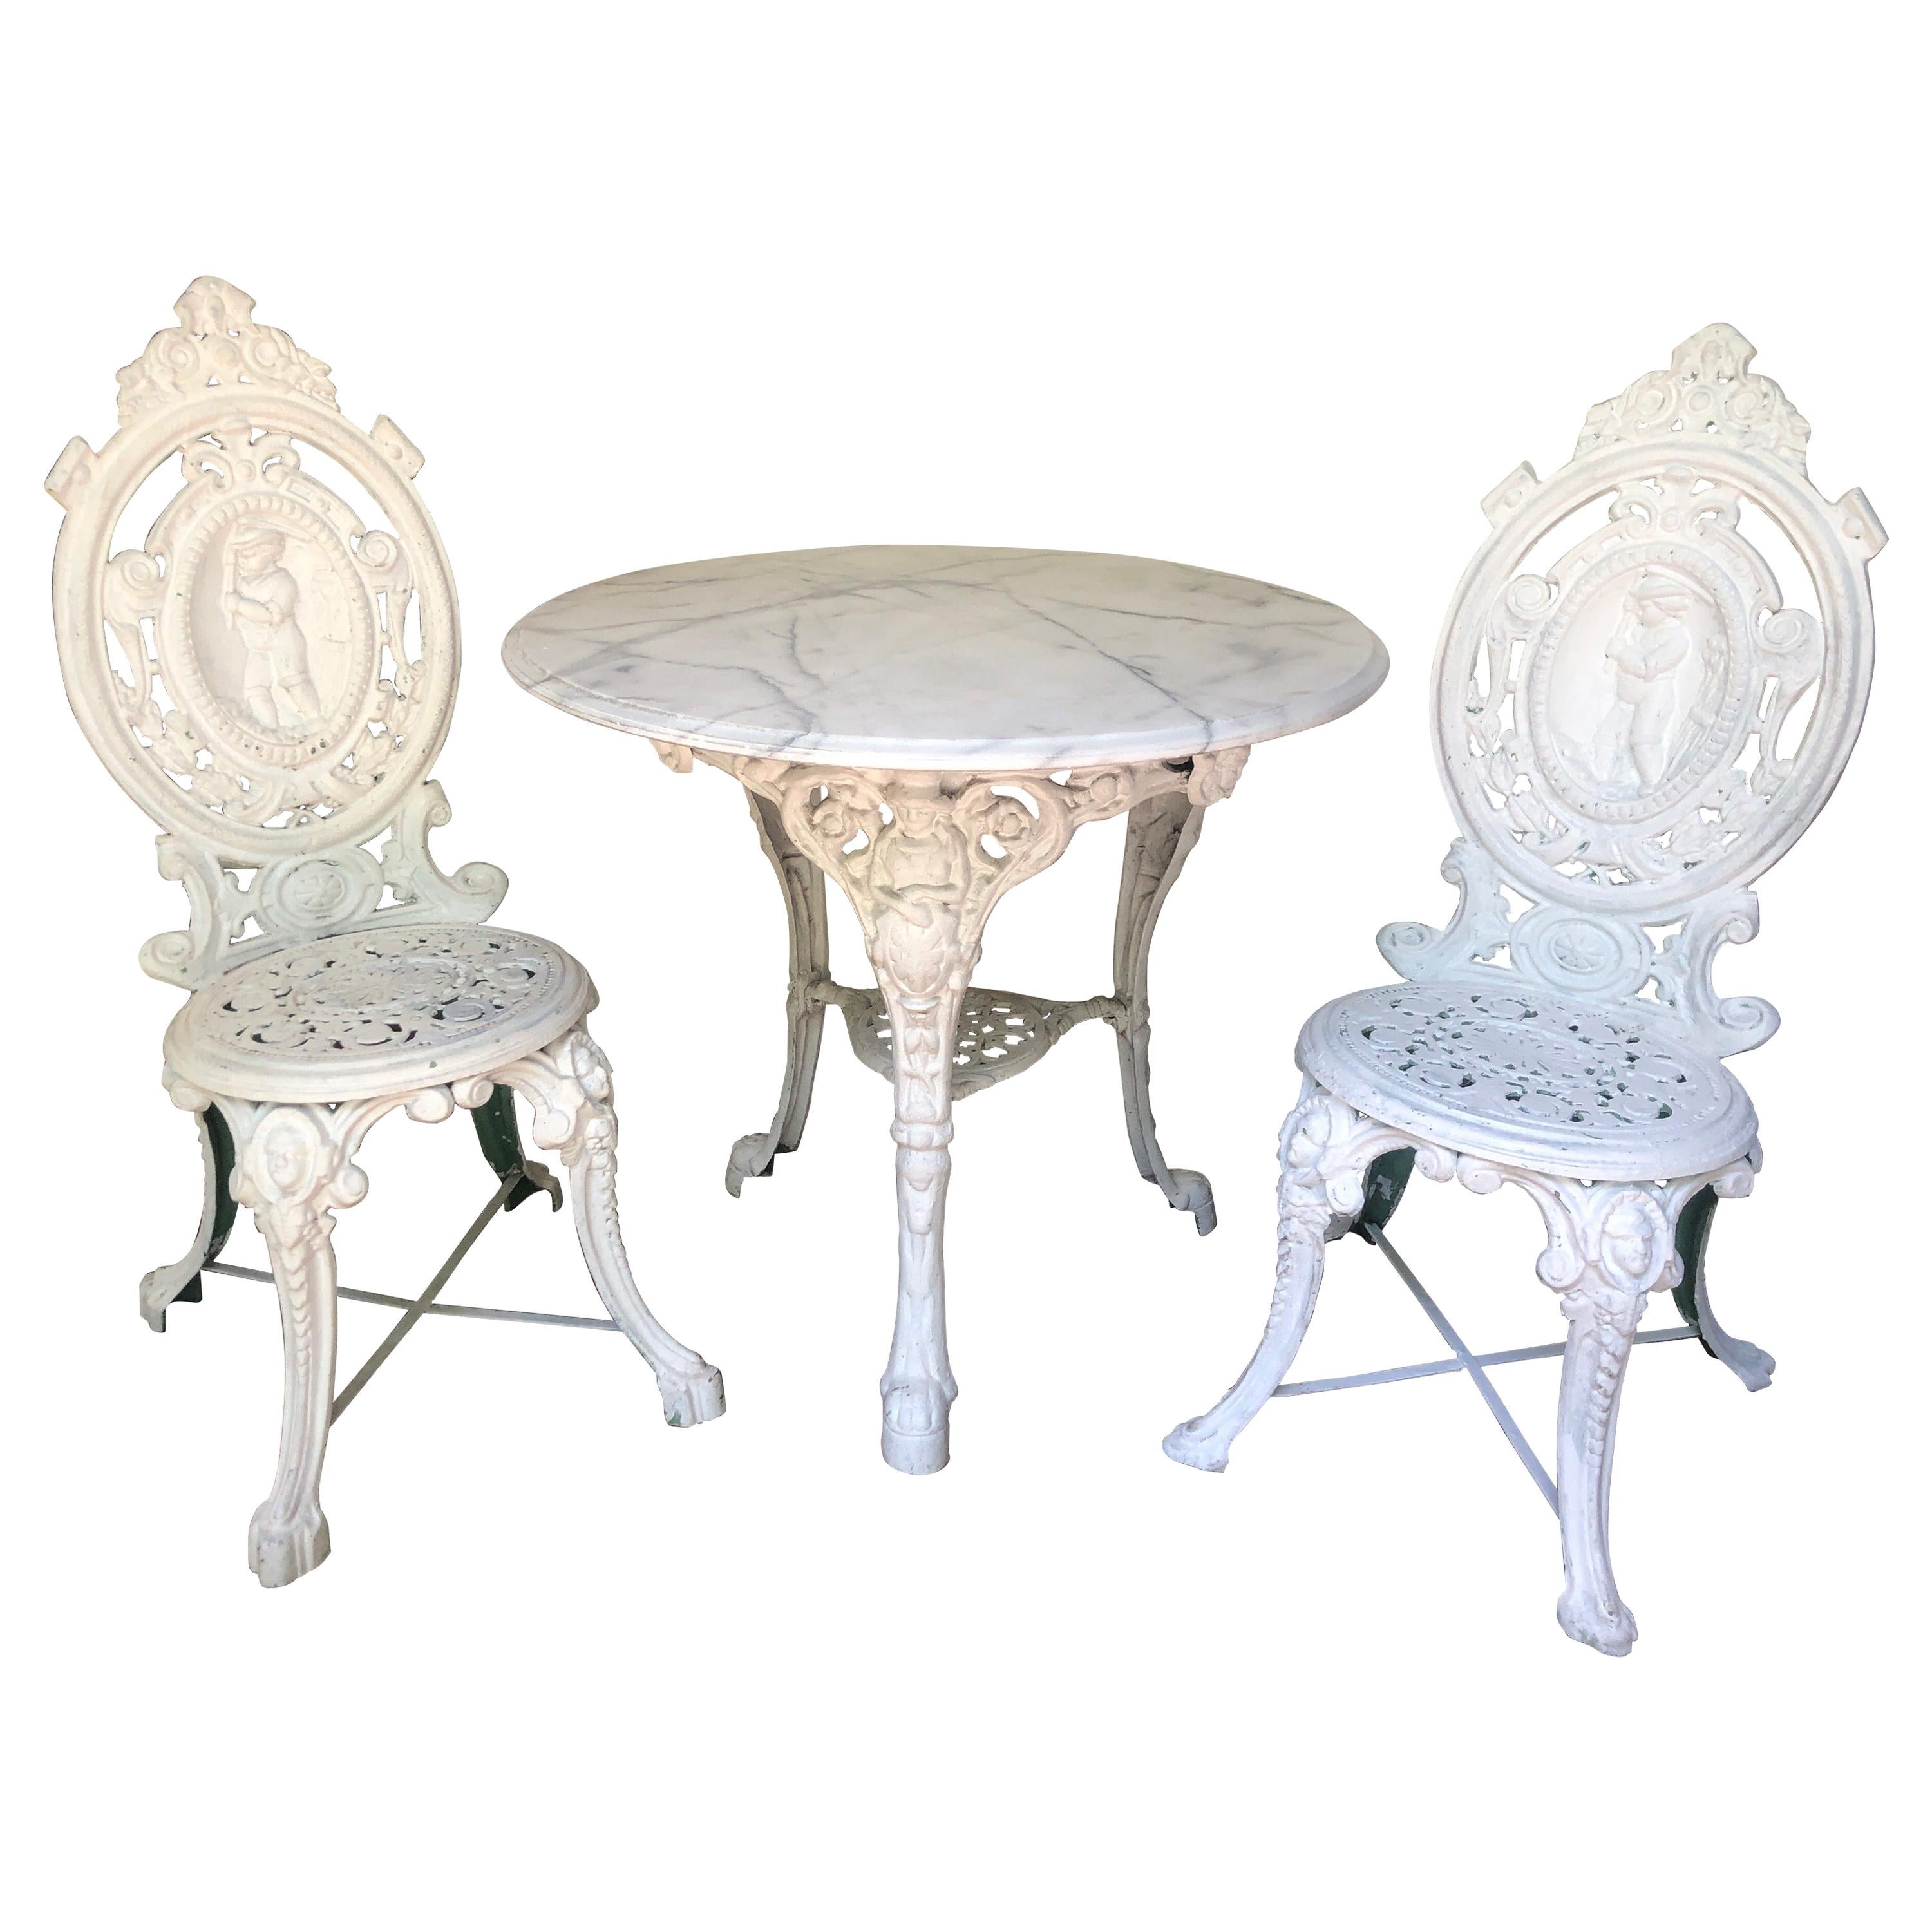 English Victorian White Cast Iron Table with Chairs and Marble Top